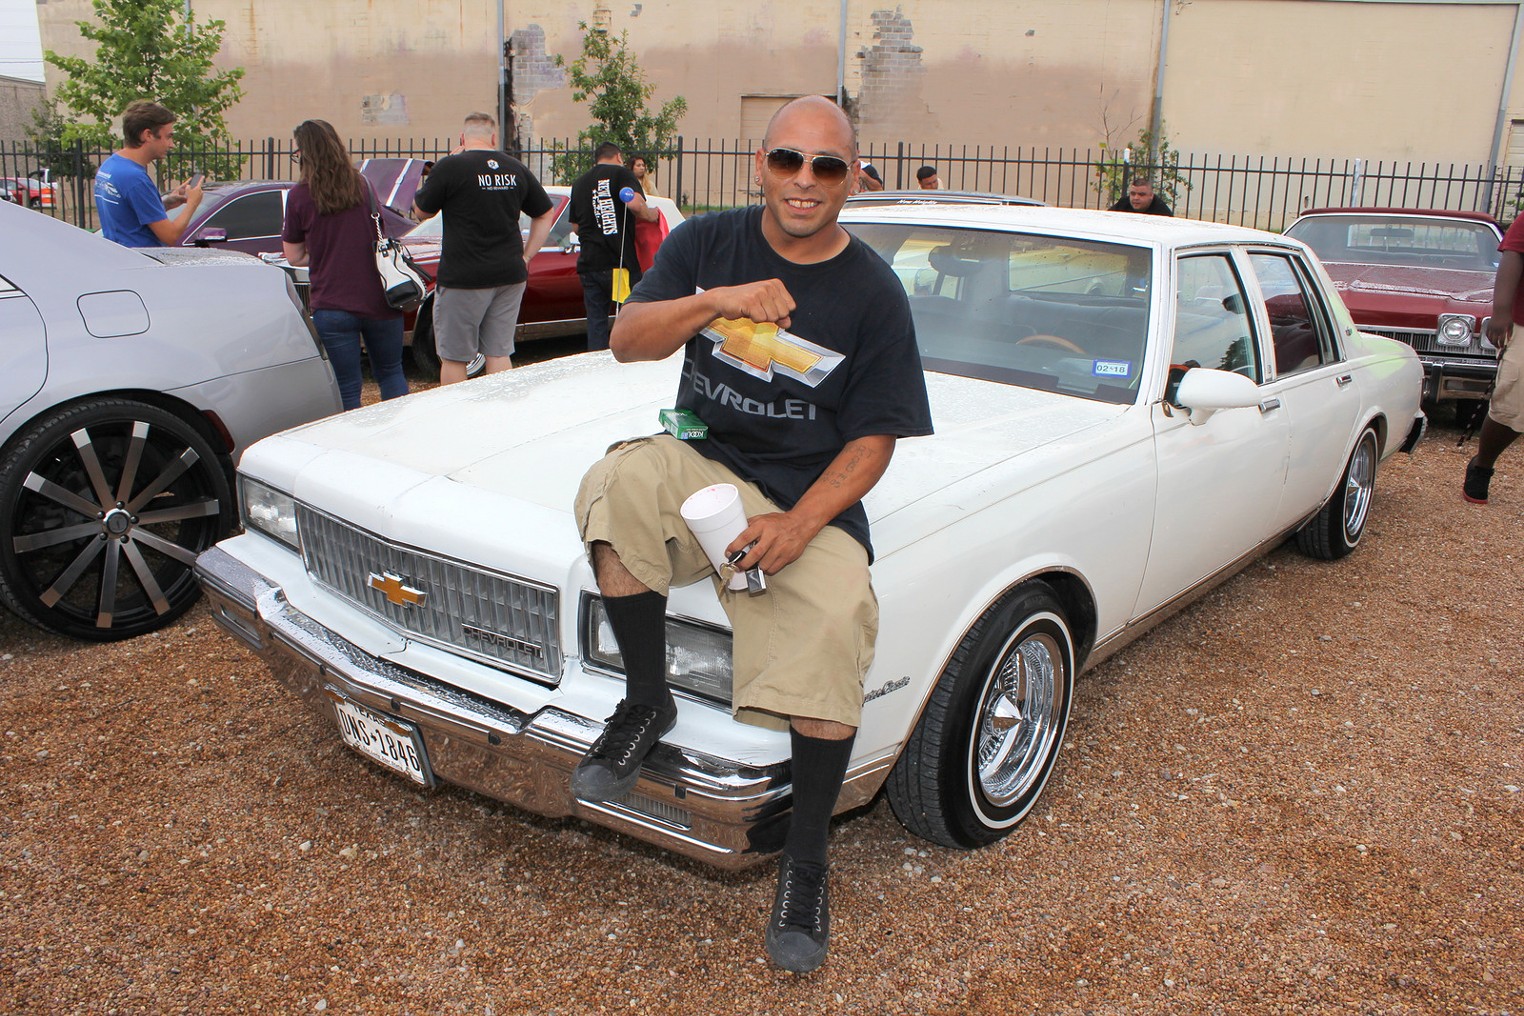 Swangin' and Bangin' at the Slab Holiday Concert and Car Show, Houston, Houston Press